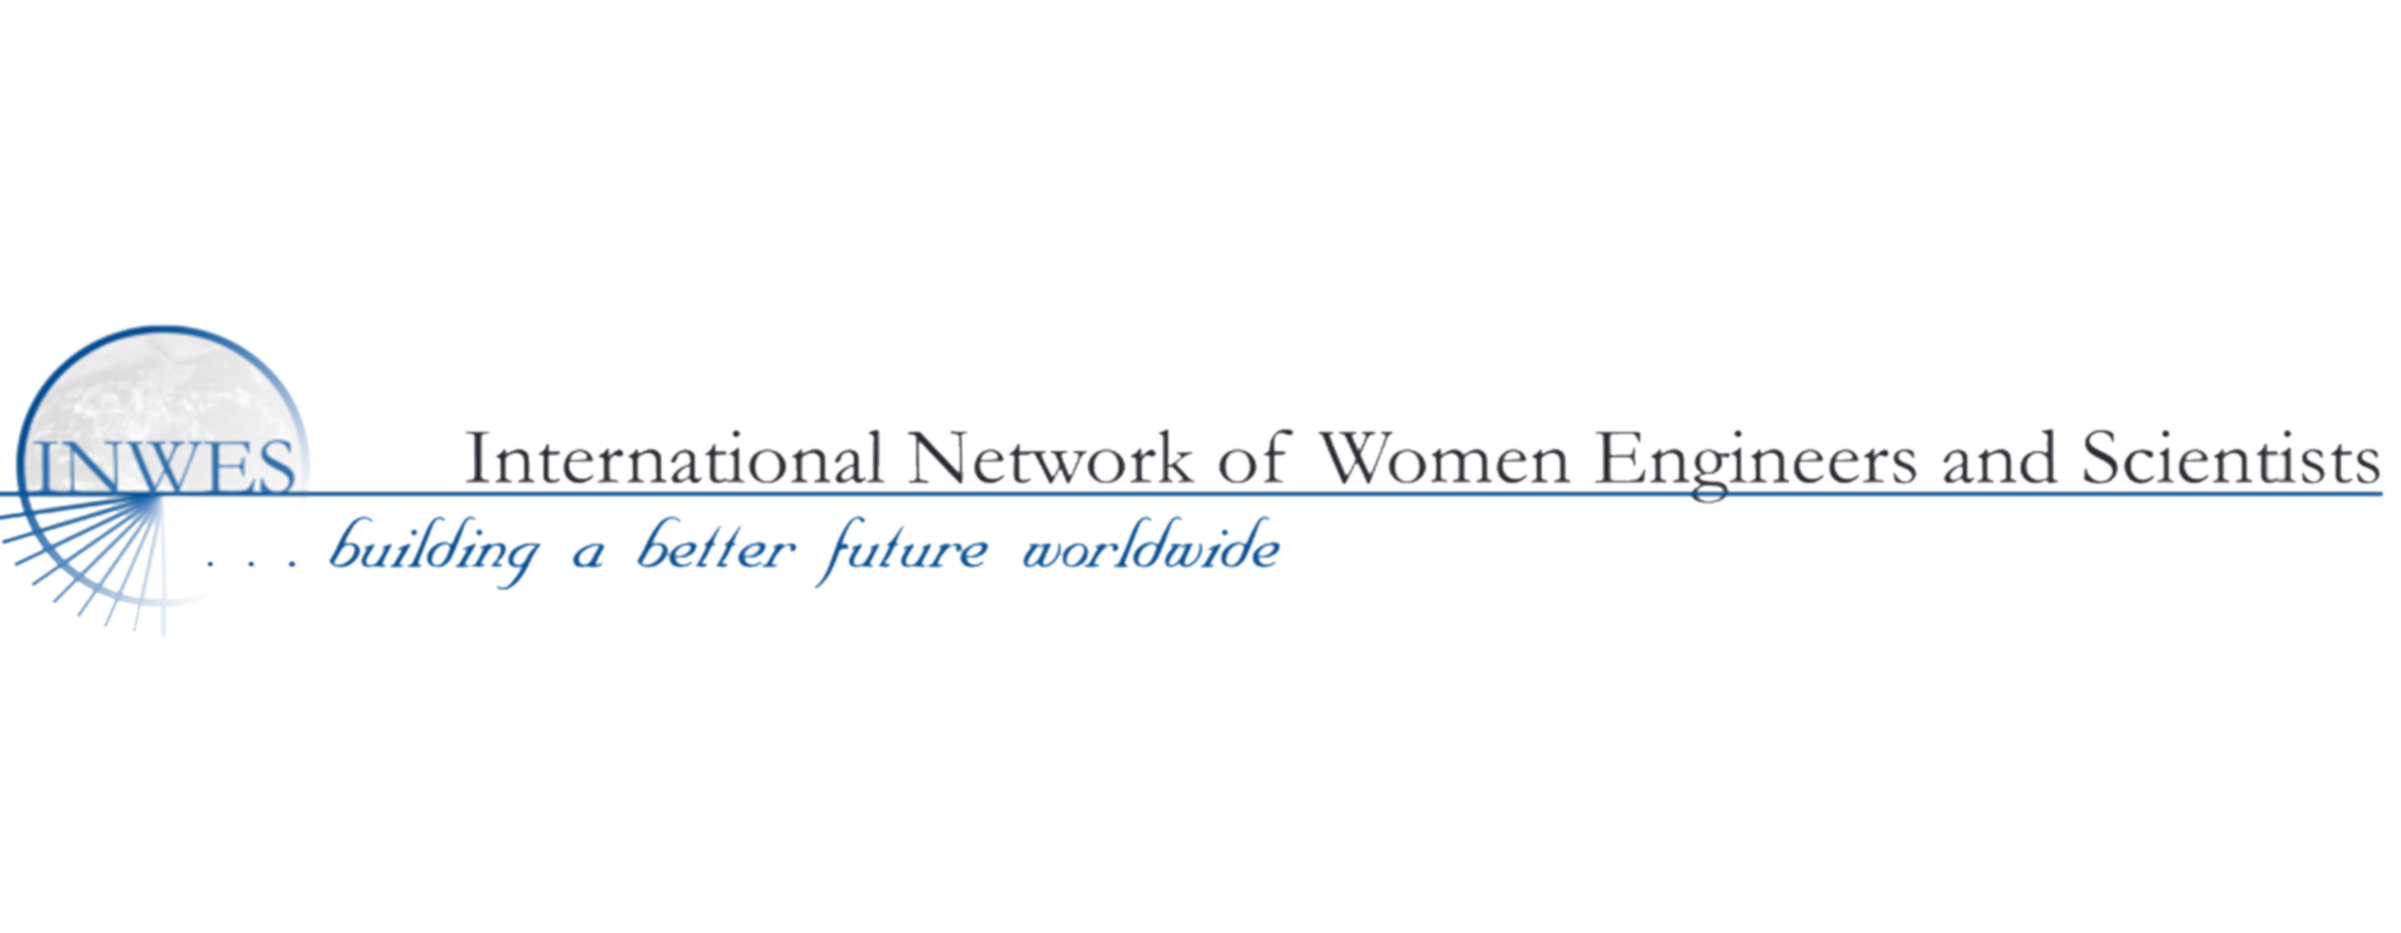 Logo del International Network of Women Engineers and Scientists (INWES)